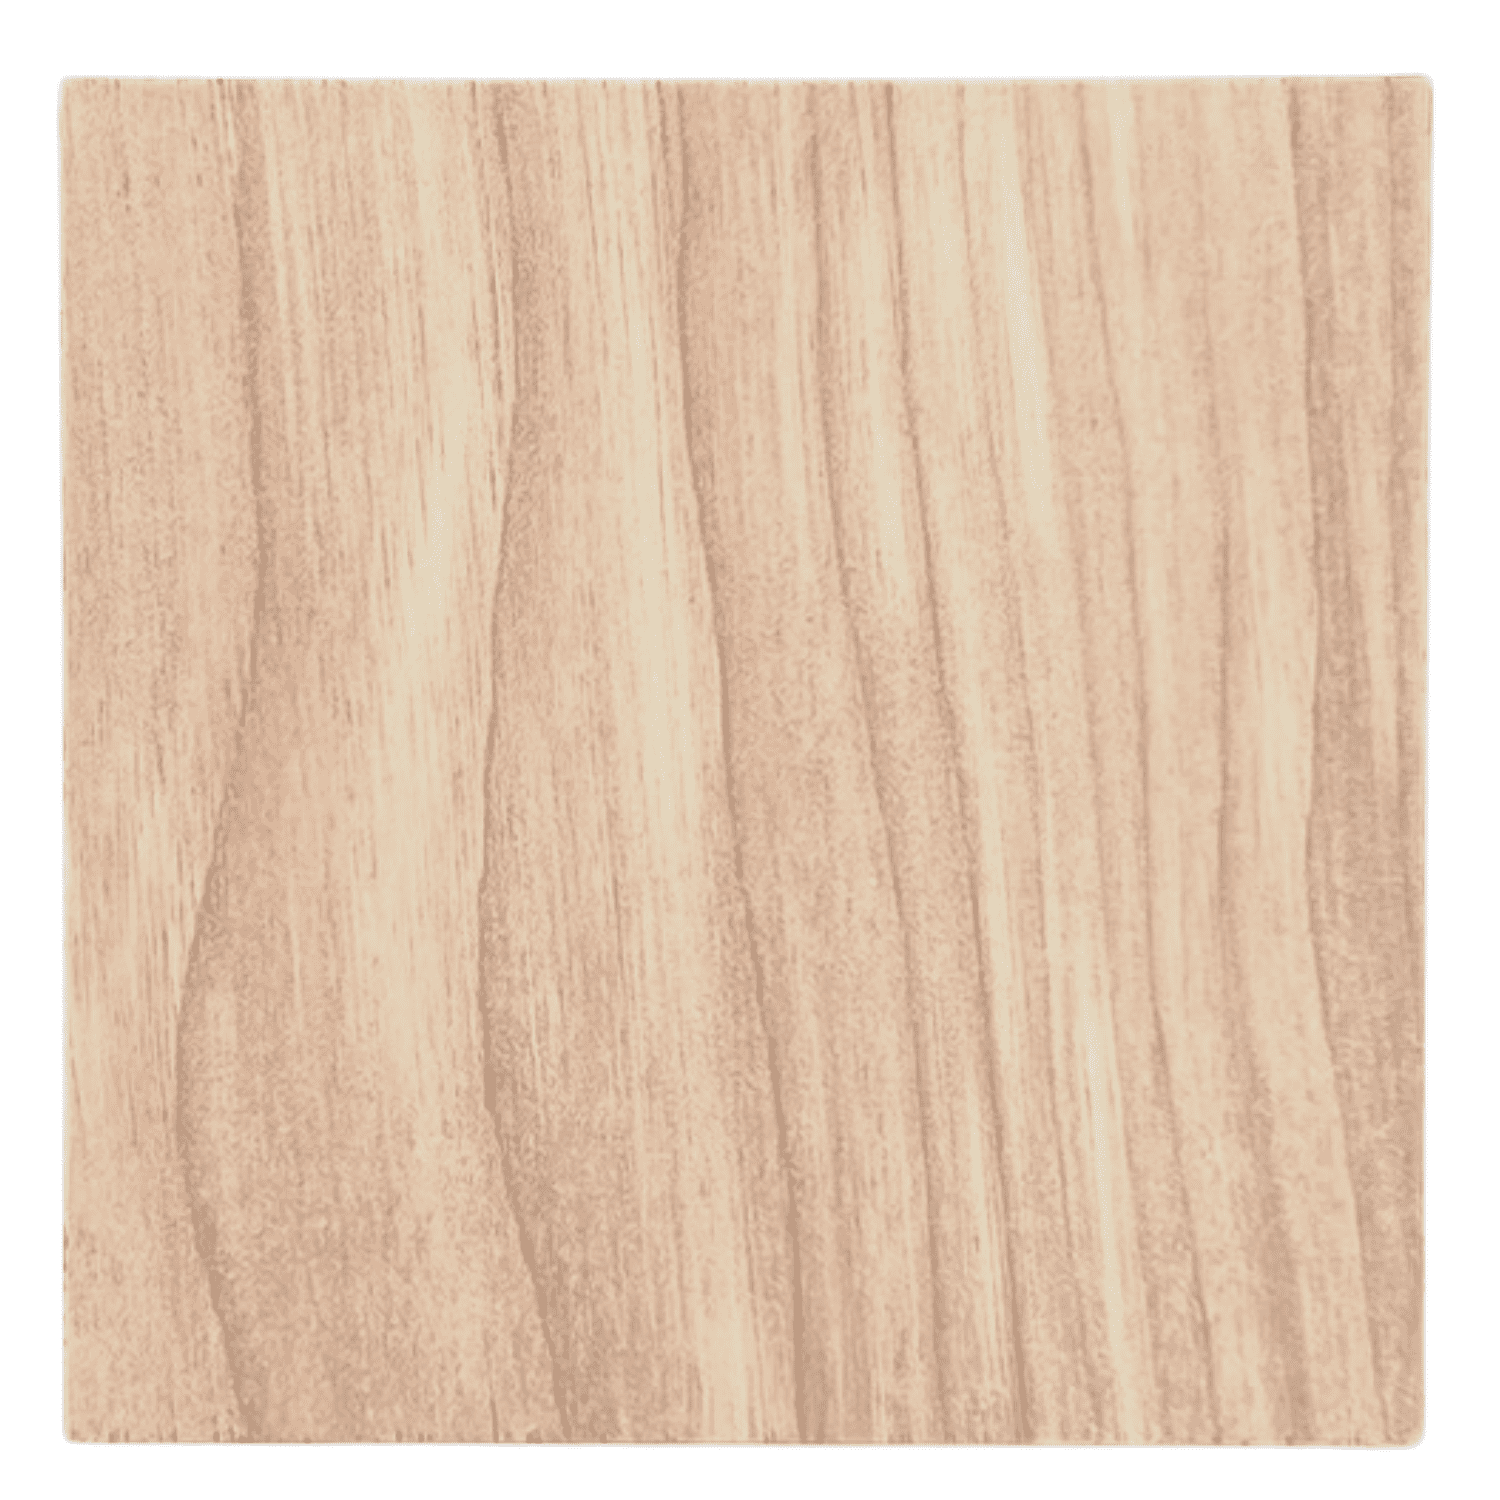 Krafty Supply Wood Squares , 1/8 Thick MDF, Bulk Set of 10 Wood Squares,  Small, 3 inches